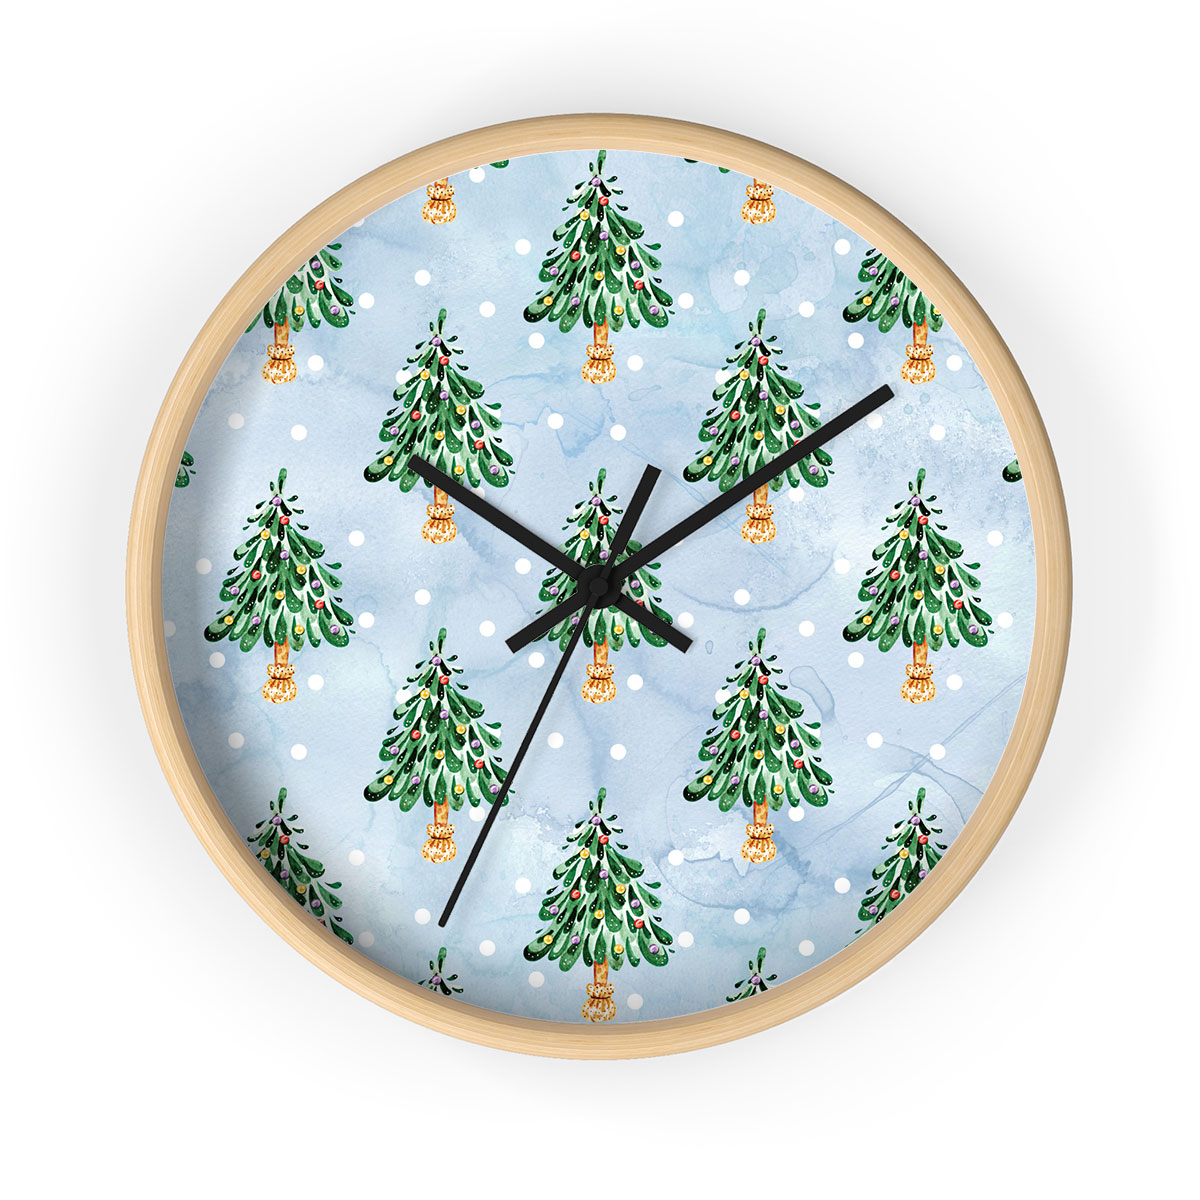 Pine Tree, Christmas Tree On Snowflake Background Printed Wooden Wall Clock